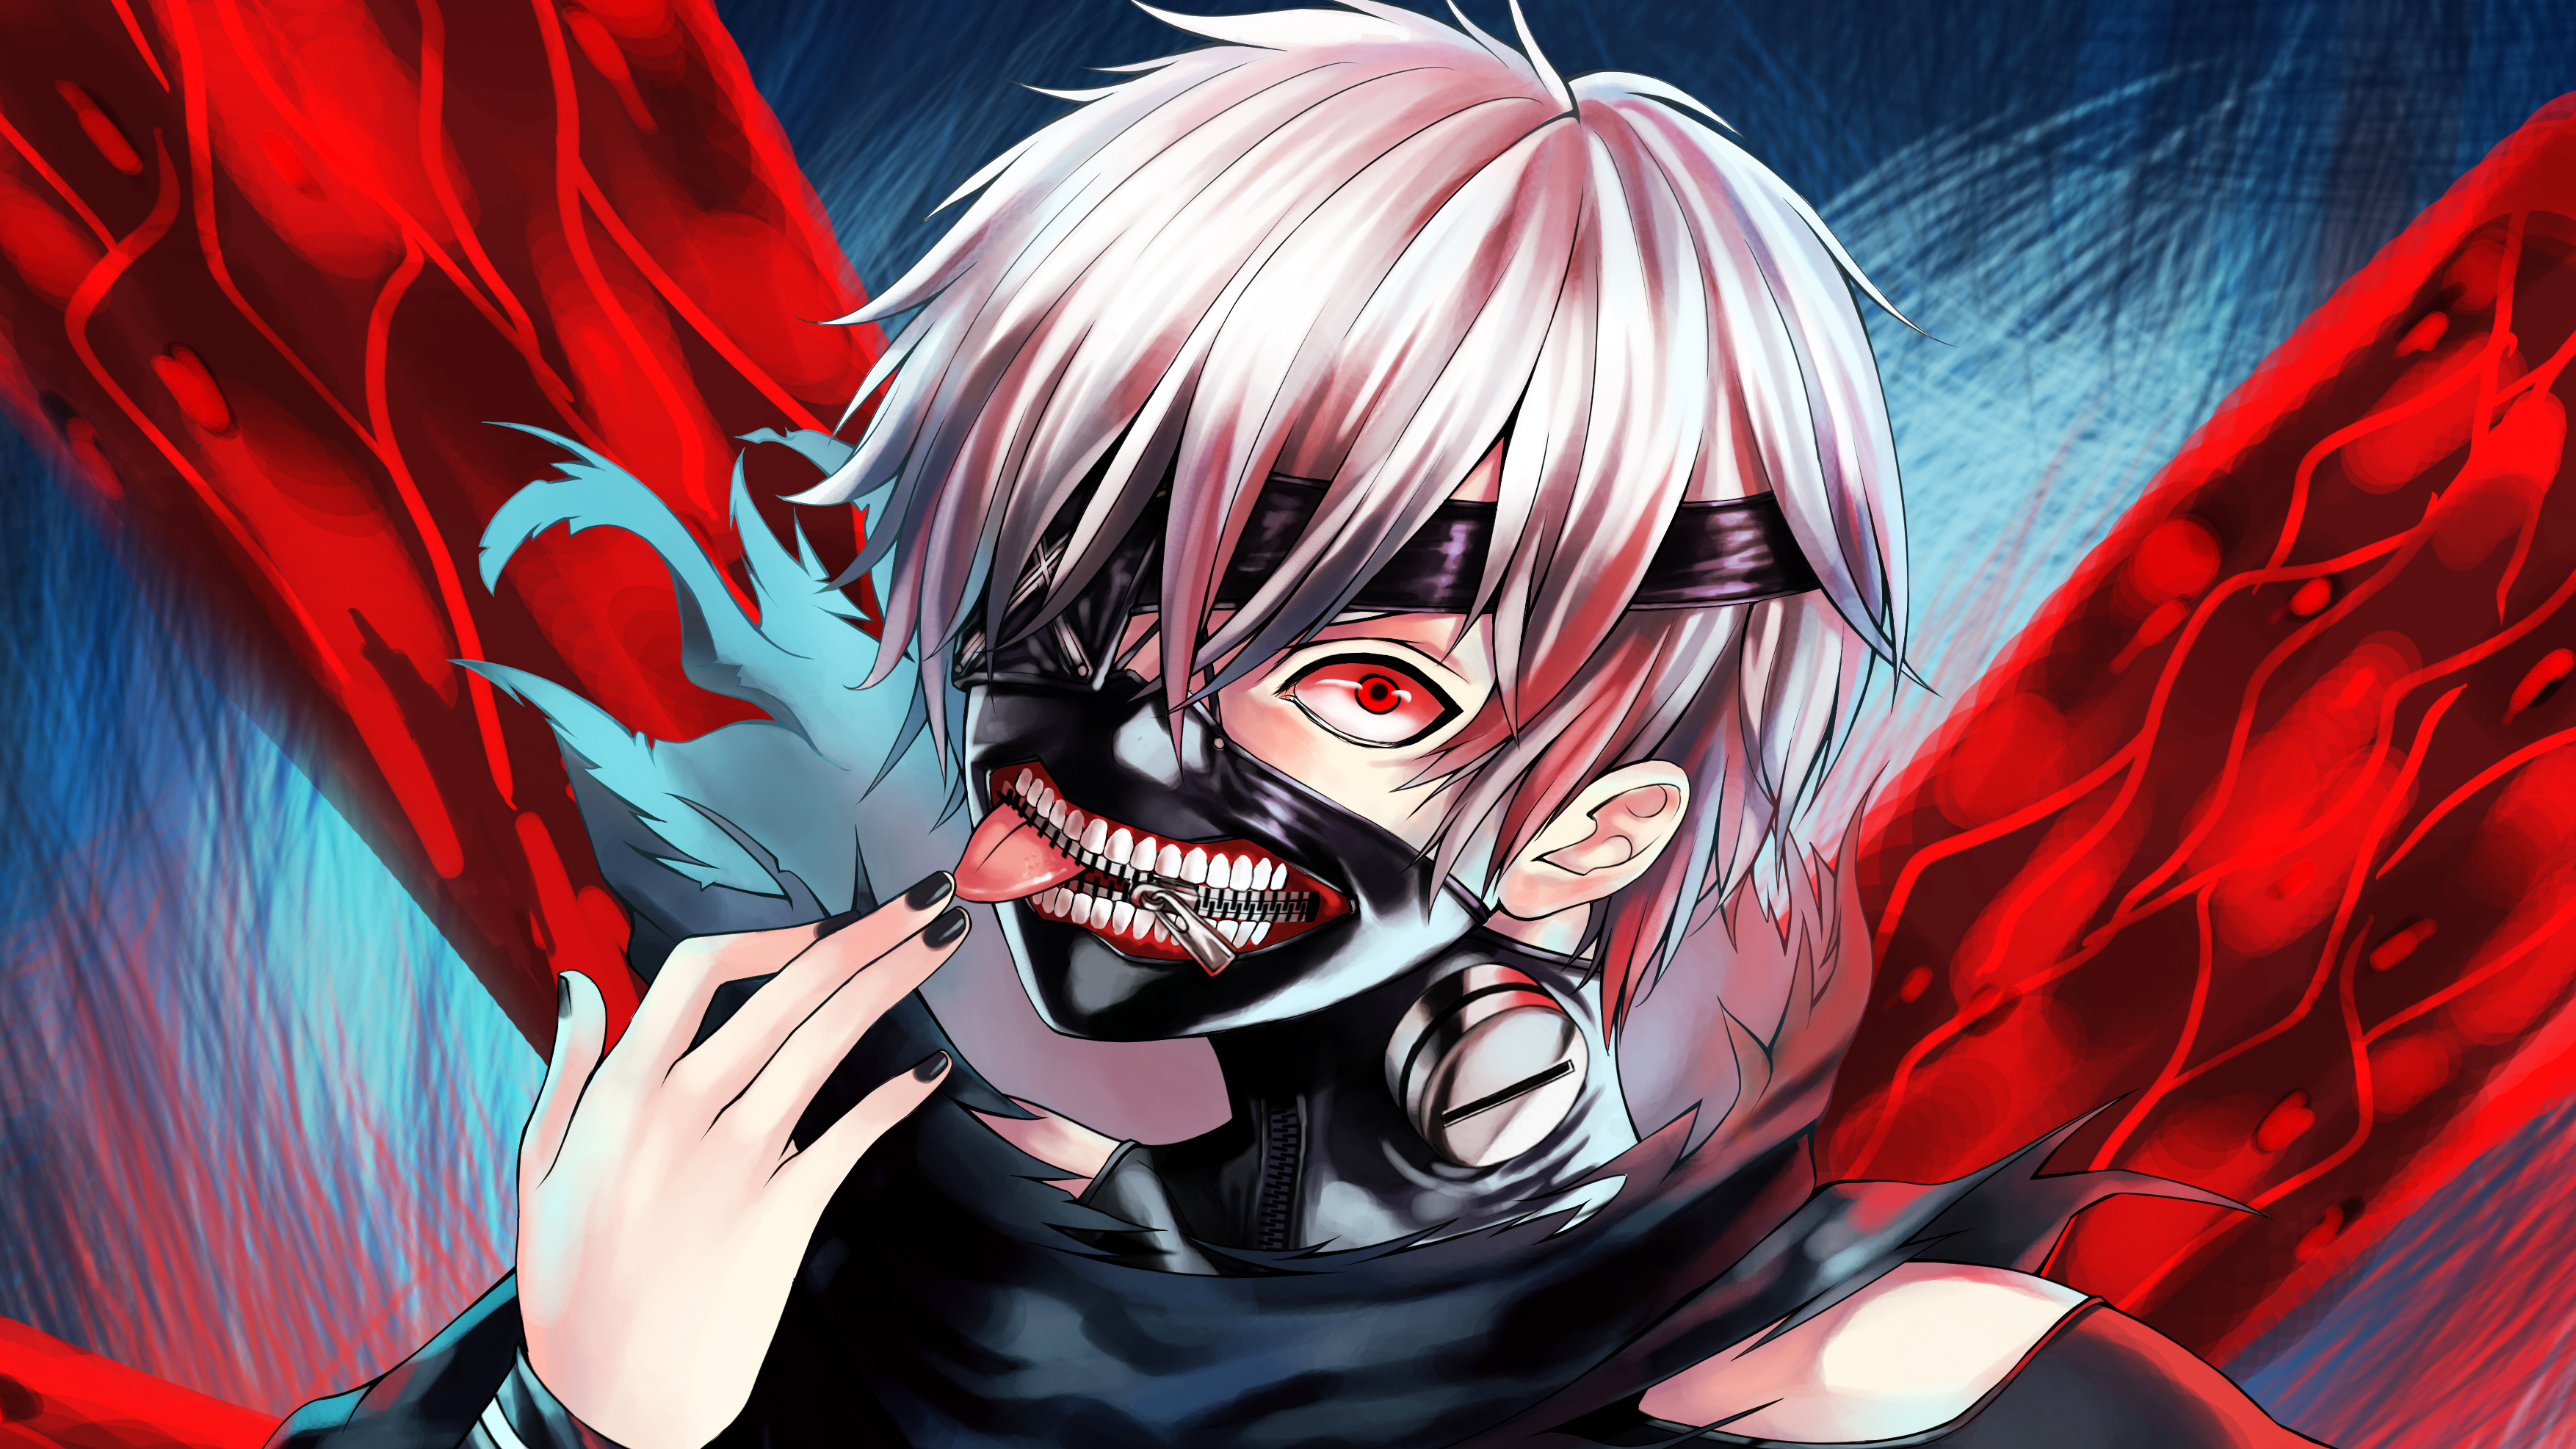  Tokyo  Ghoul  Anime  4k HD Anime  4k Wallpapers Images 